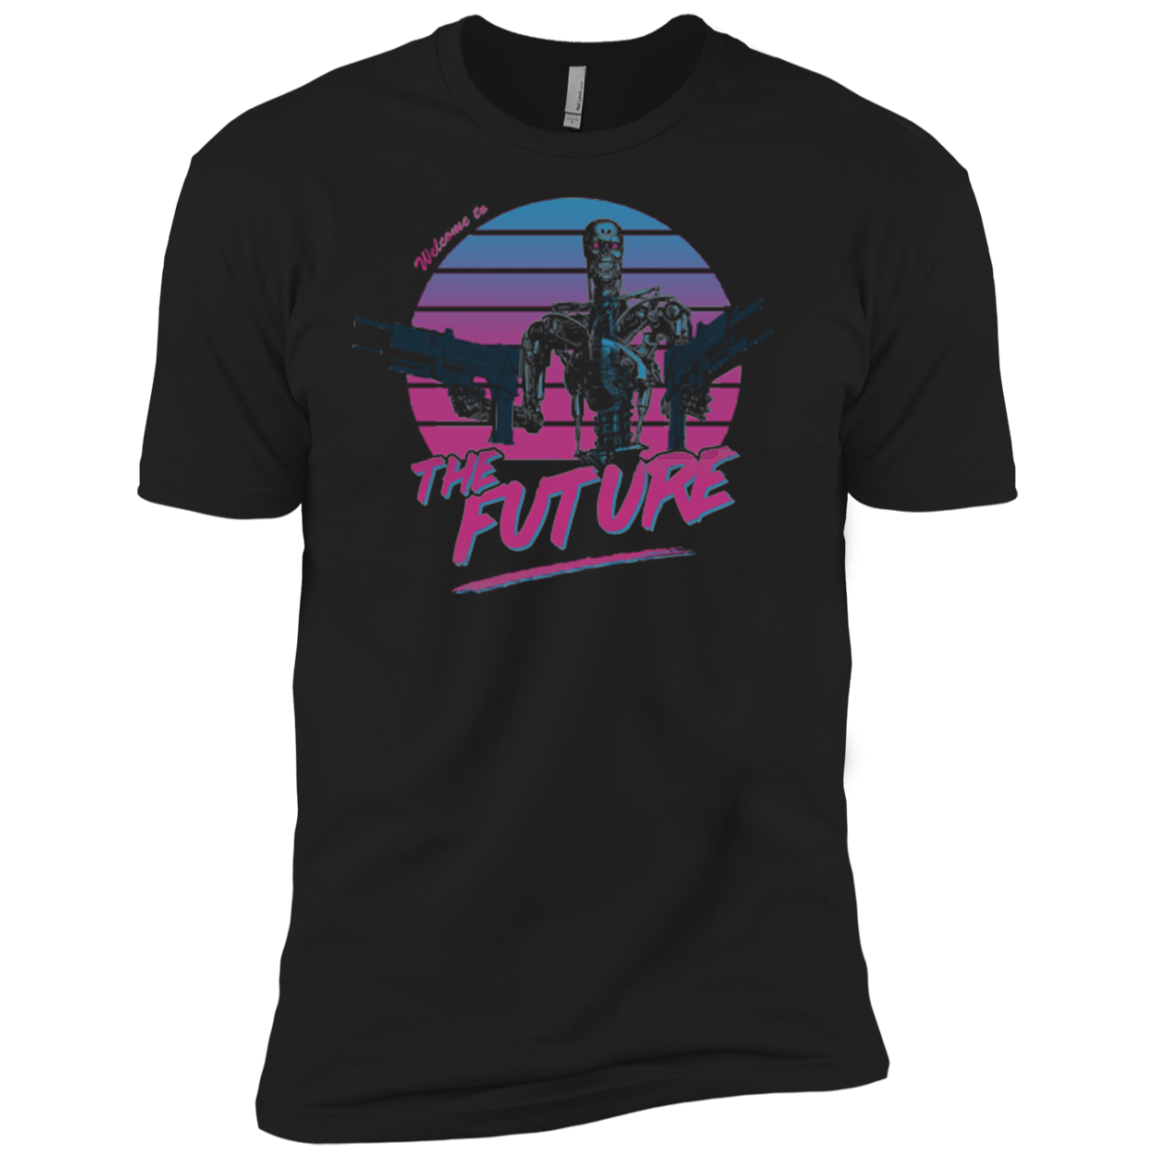 Welcome to the Future Men's Premium T-Shirt